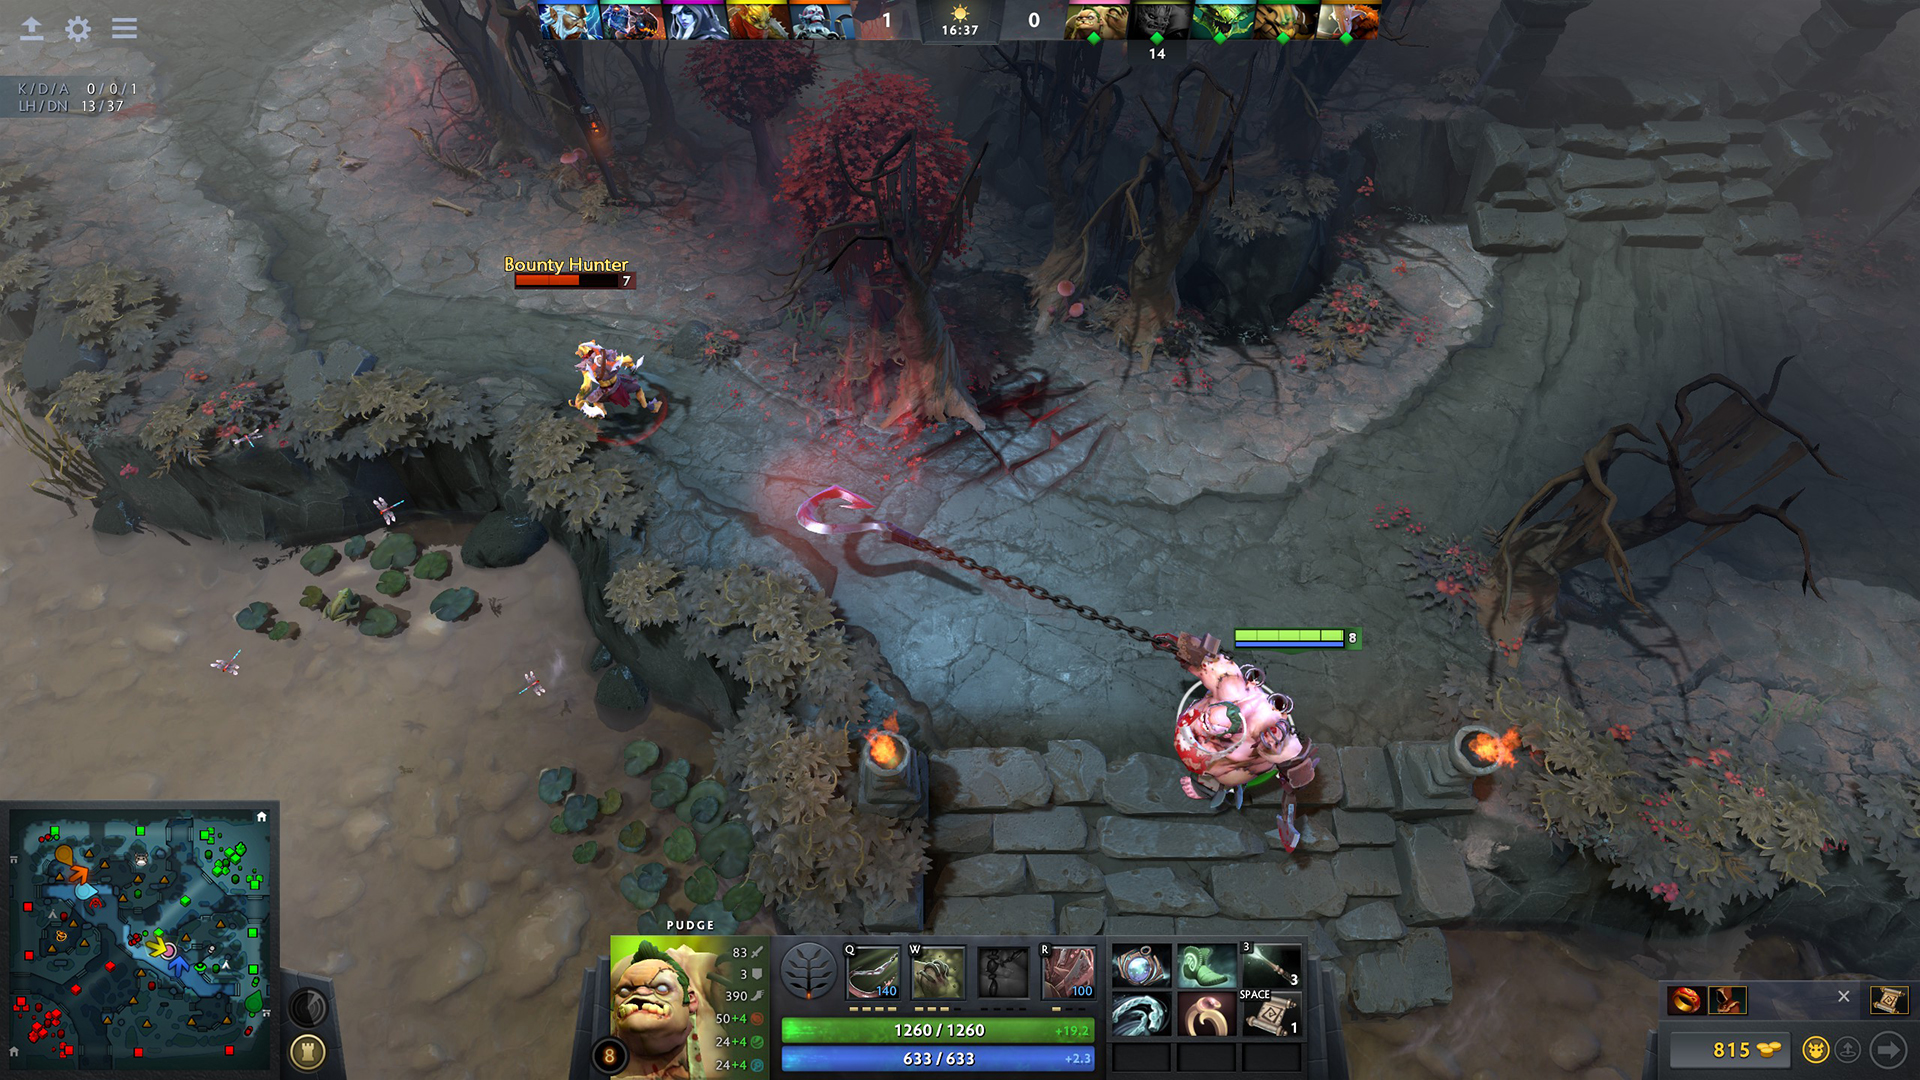 Best free PC games: Dota 2. Image shows the character Pudge throwing a hook at a Bounty Hunter 